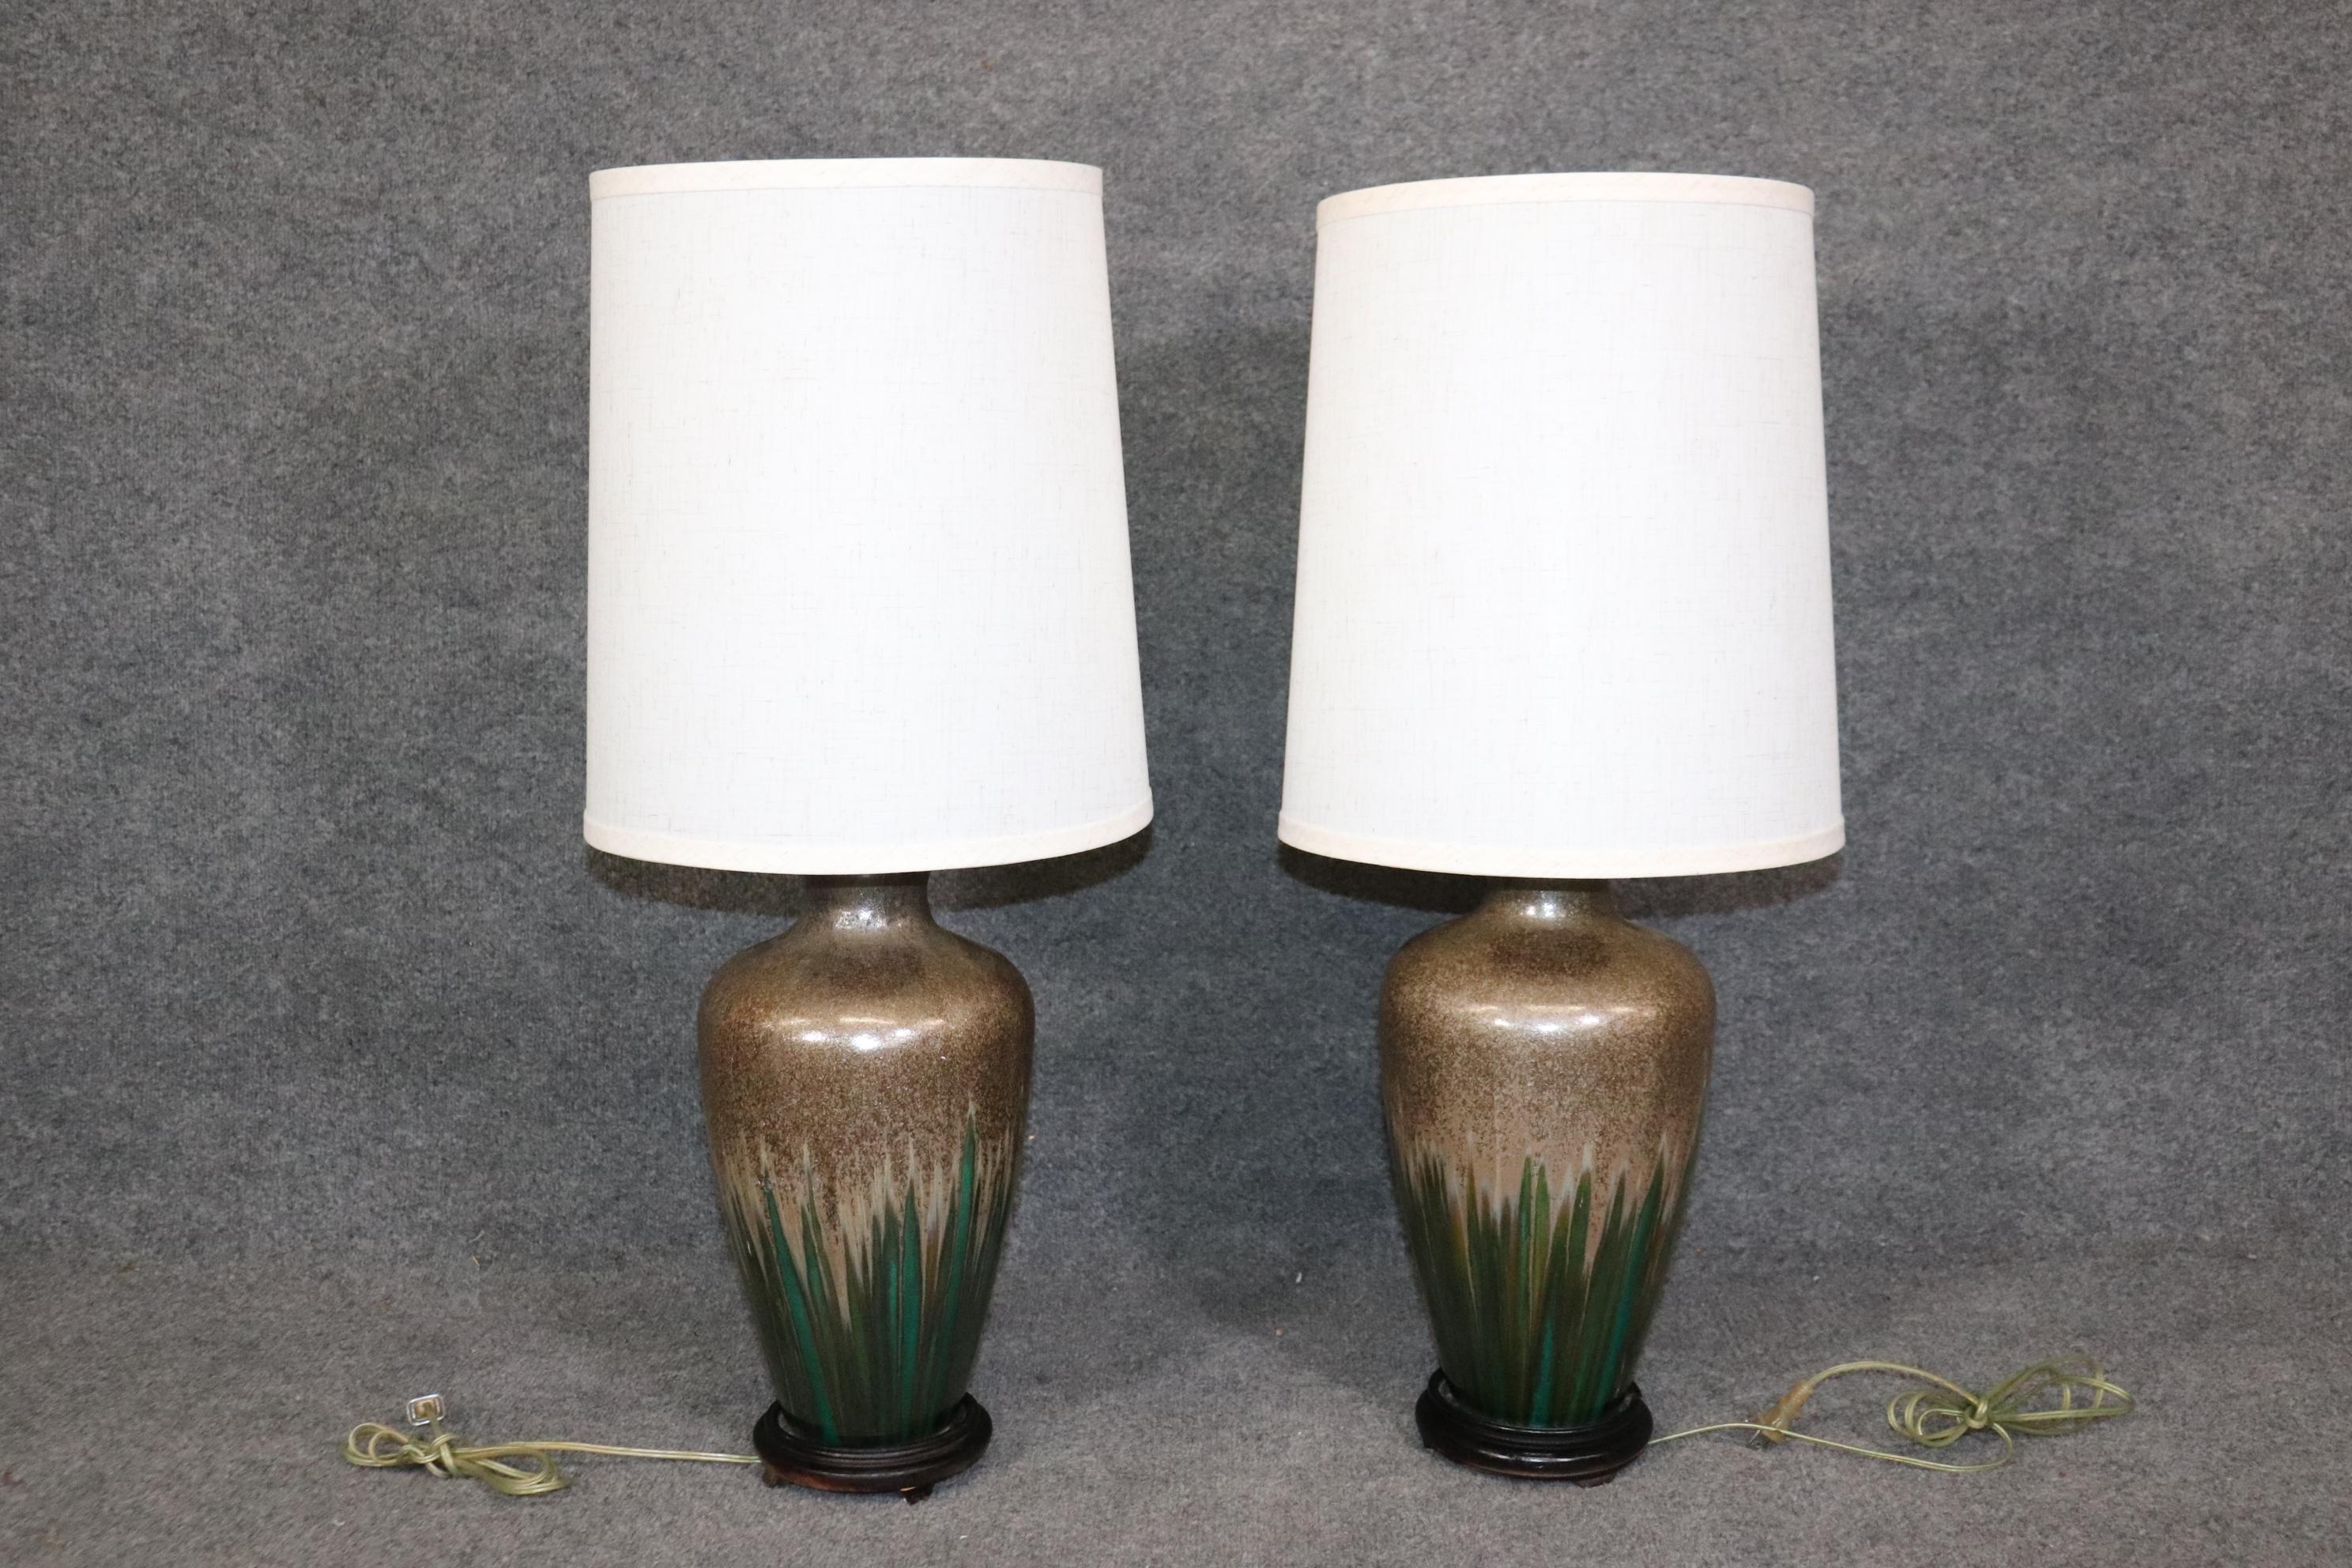 Dimensions- H: 33in W: 14in D: 14in (measurements with shades on) 
This Mid Century Modern Pair of Green Pottery Glazed Table Lamps are truly an interesting example of minimalistic yet luxurious decor. This pair of lamps are crafted of the highest